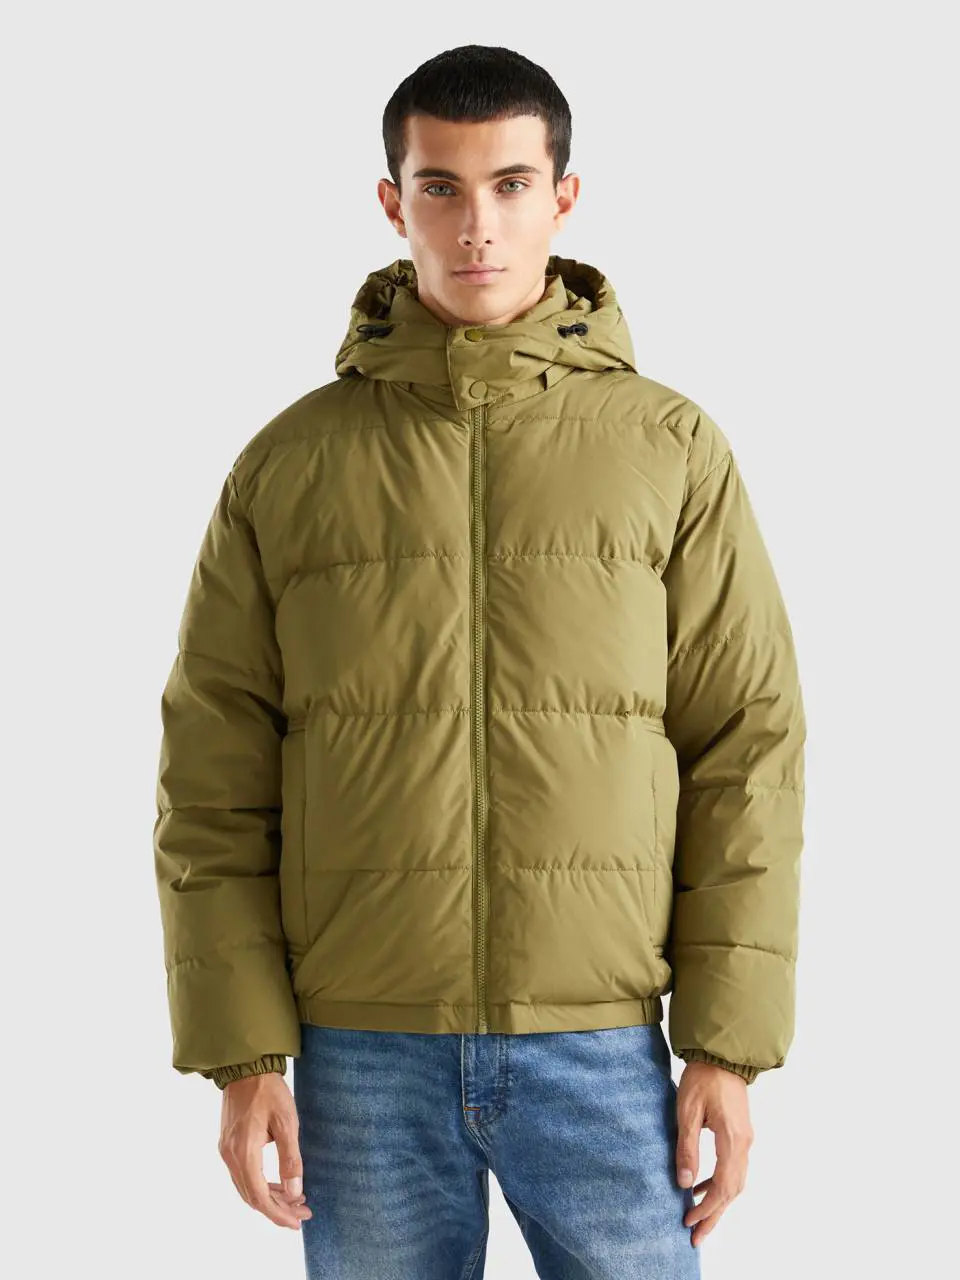 Benetton padded jacket with removable hood. 1